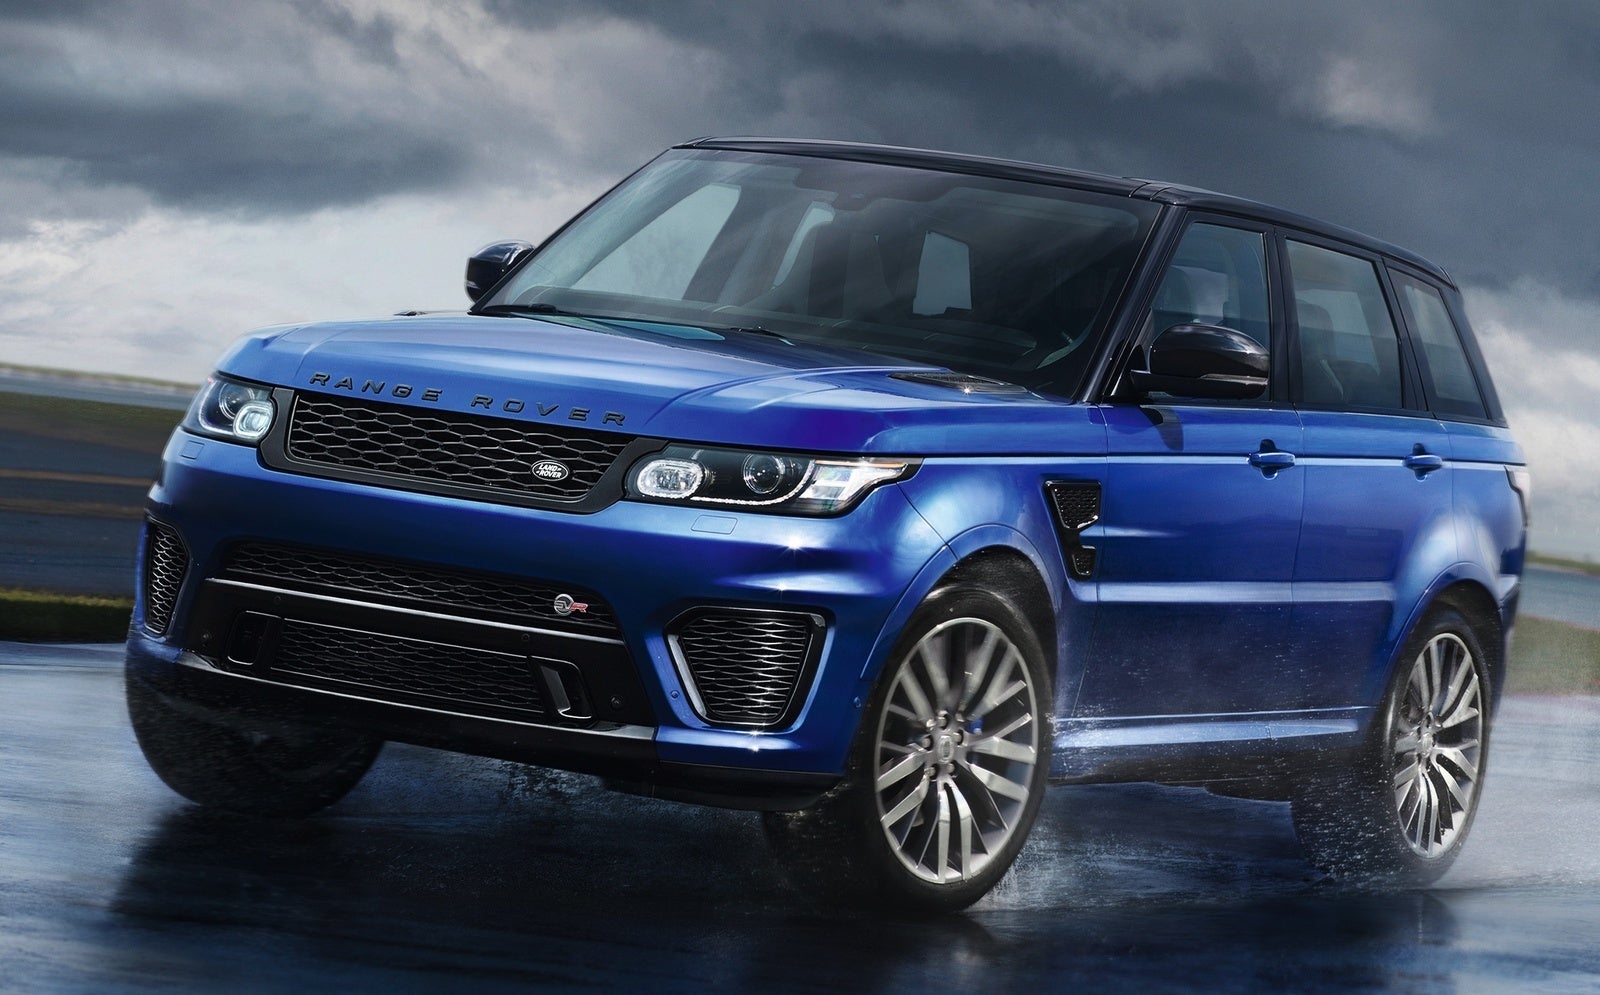 2015 Land Rover Range Rover Sport - Review - CarGurus